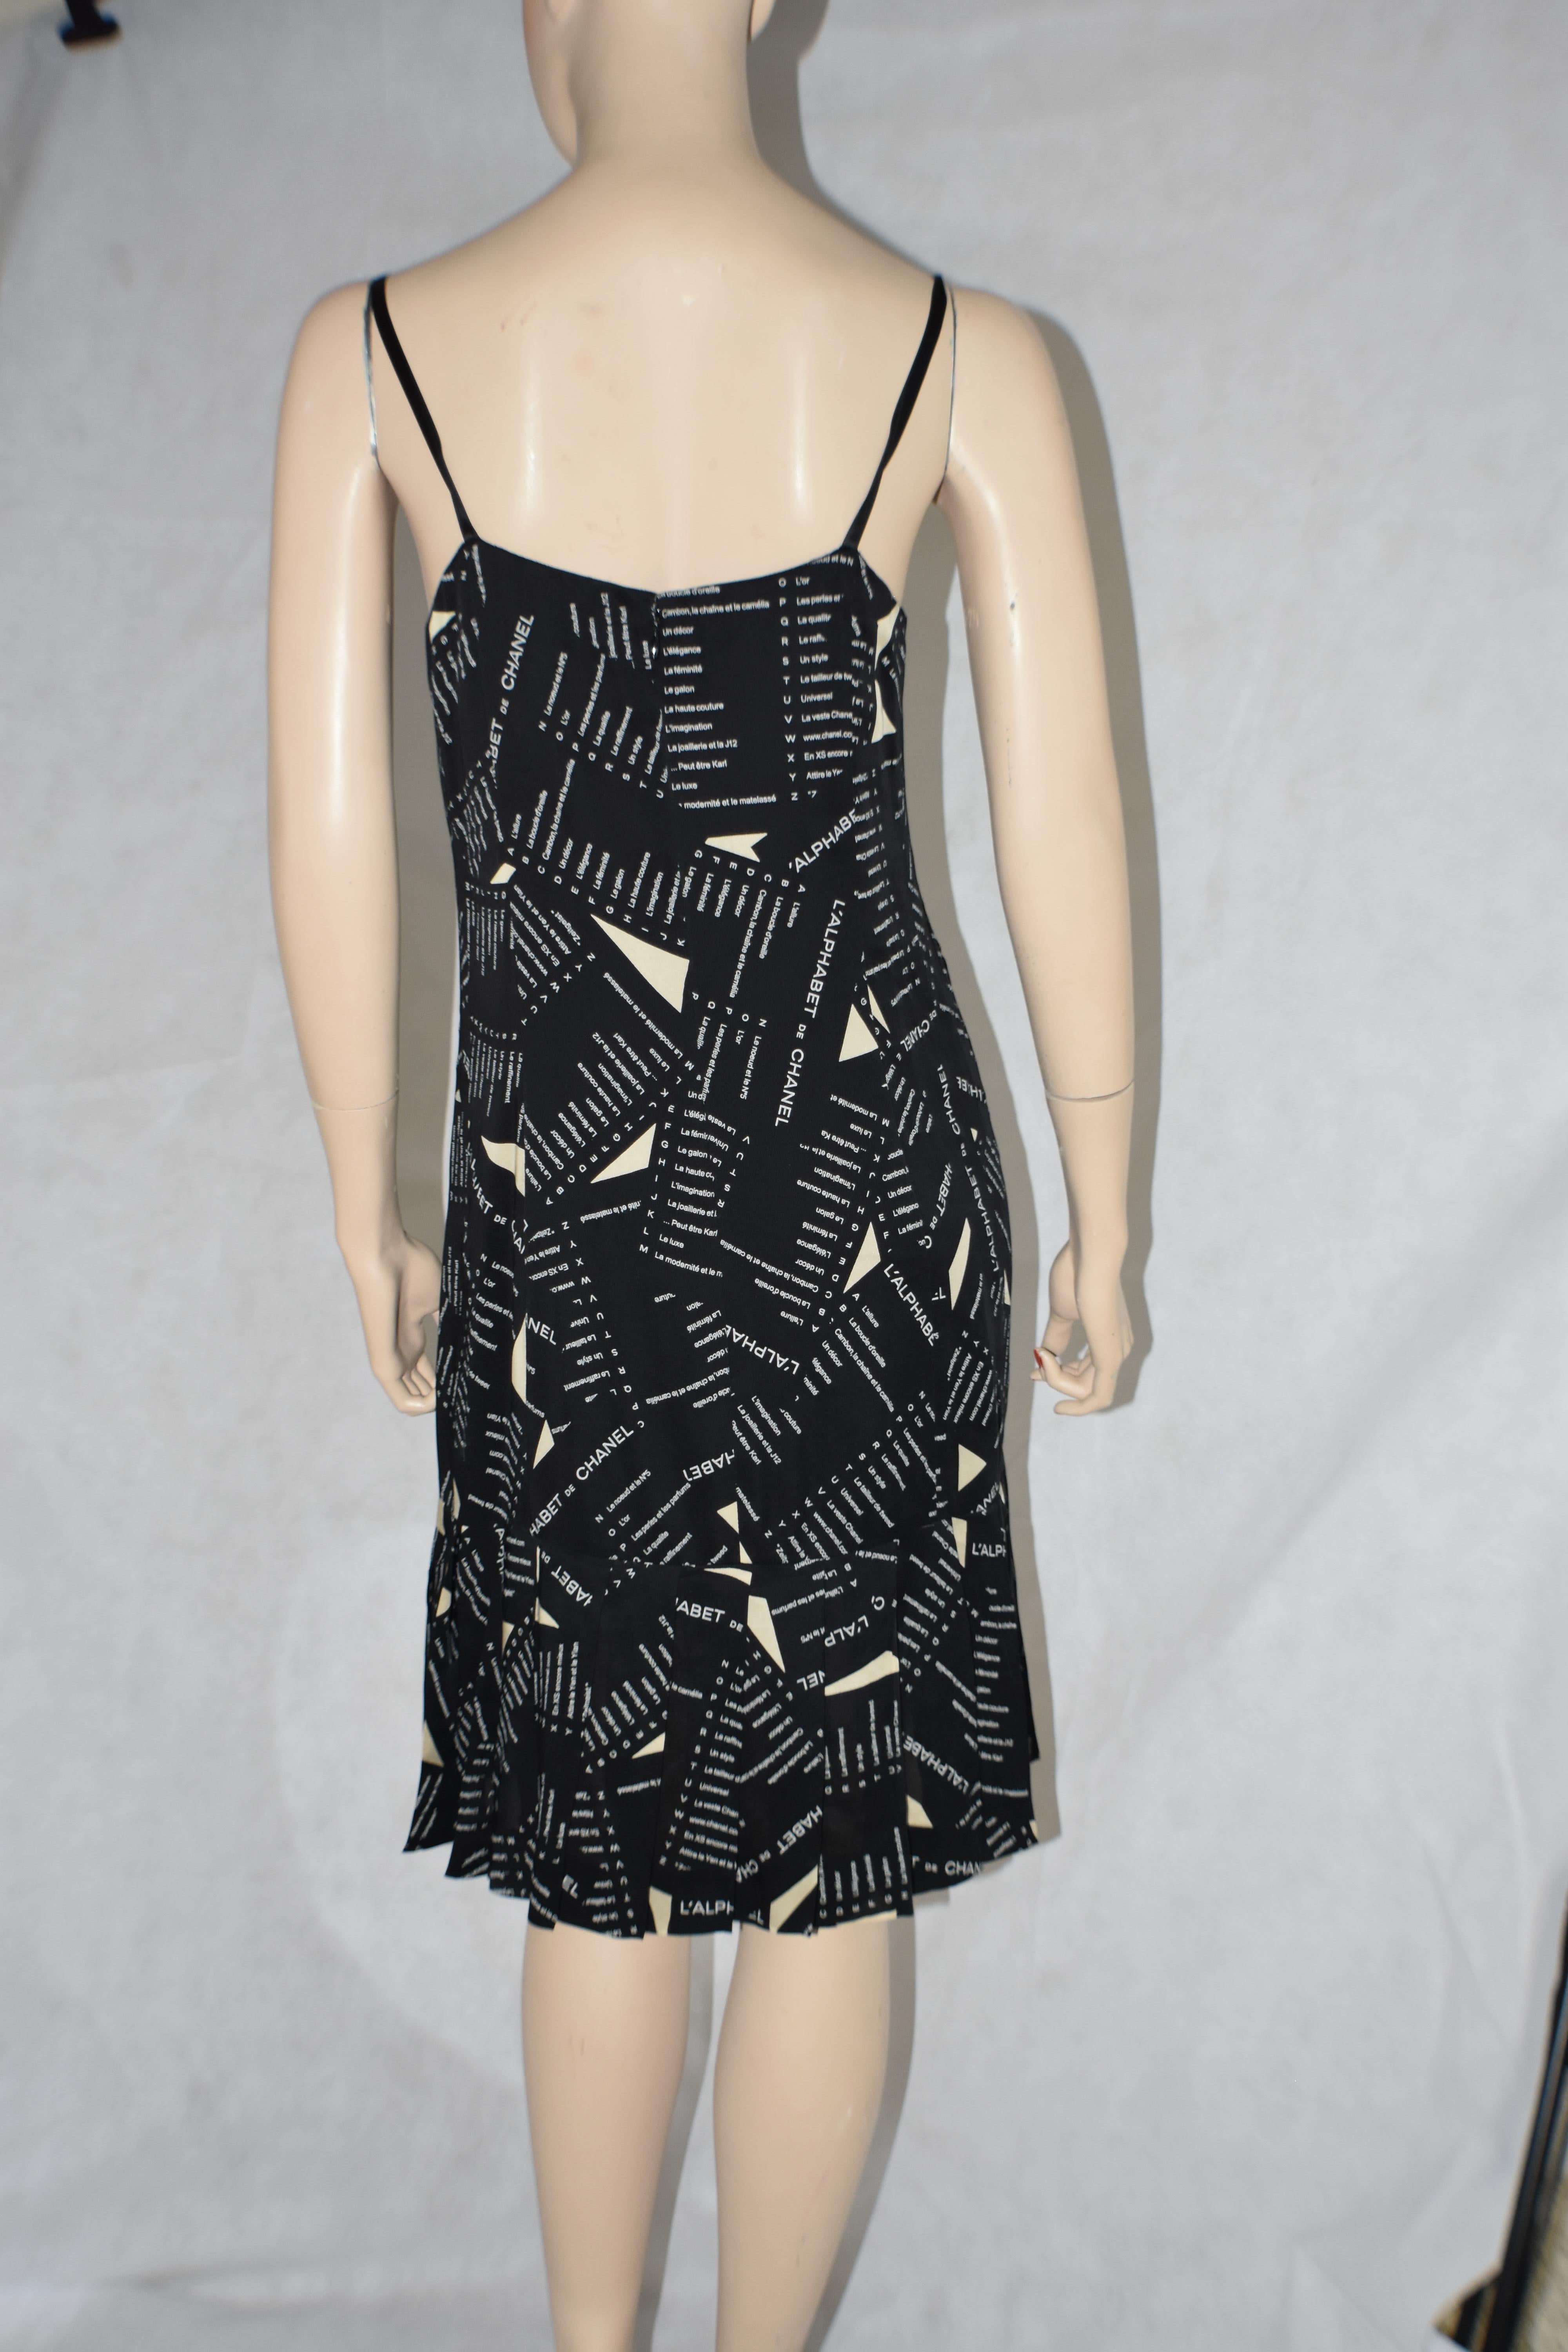 Chanel 05A Fall 2005 Runway 2 Piece dress 40 Mint In Excellent Condition For Sale In Merced, CA